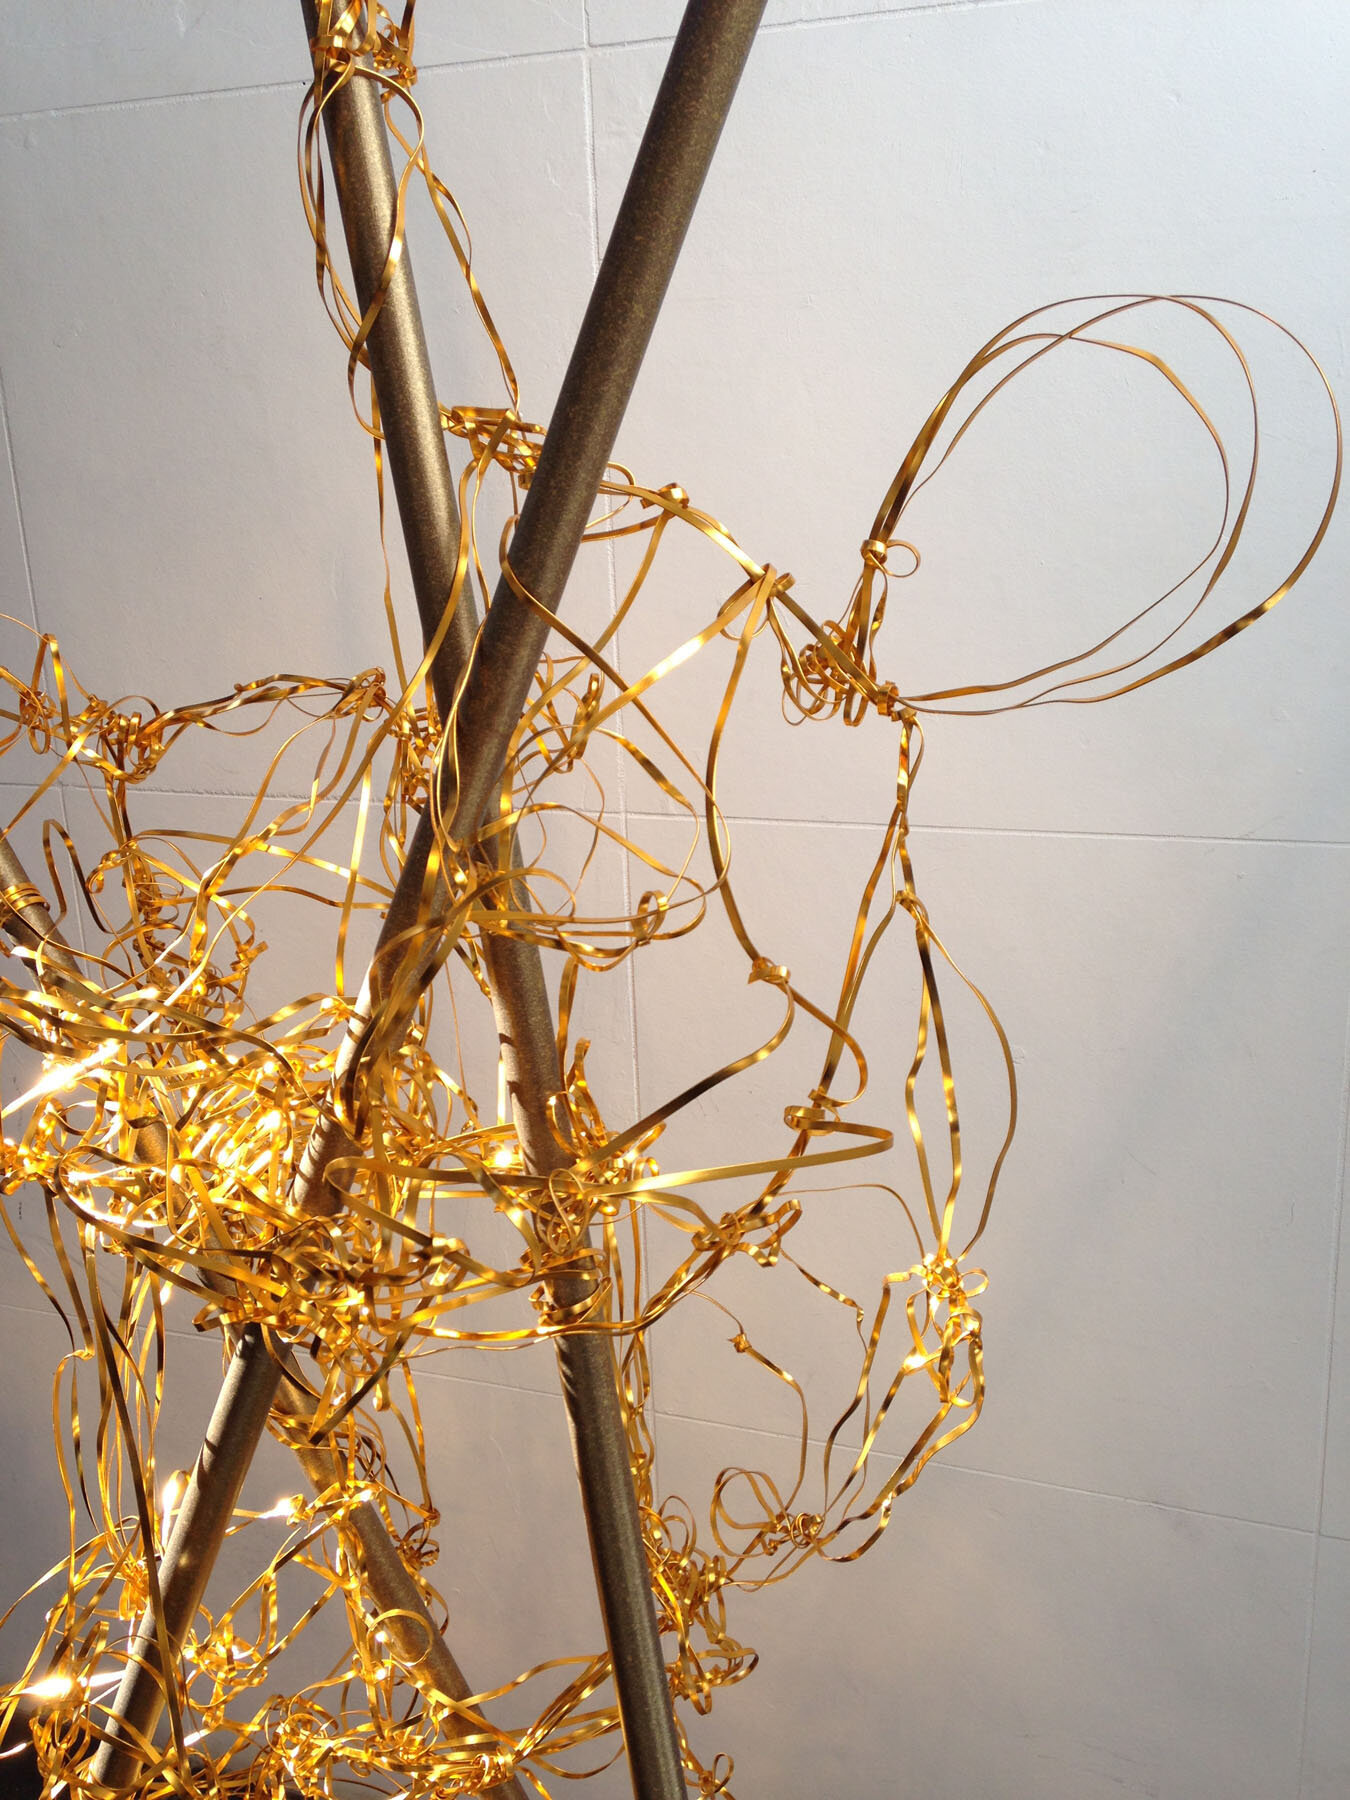 anne patterson_all that glitters is gold_wire sculpture_3.jpg